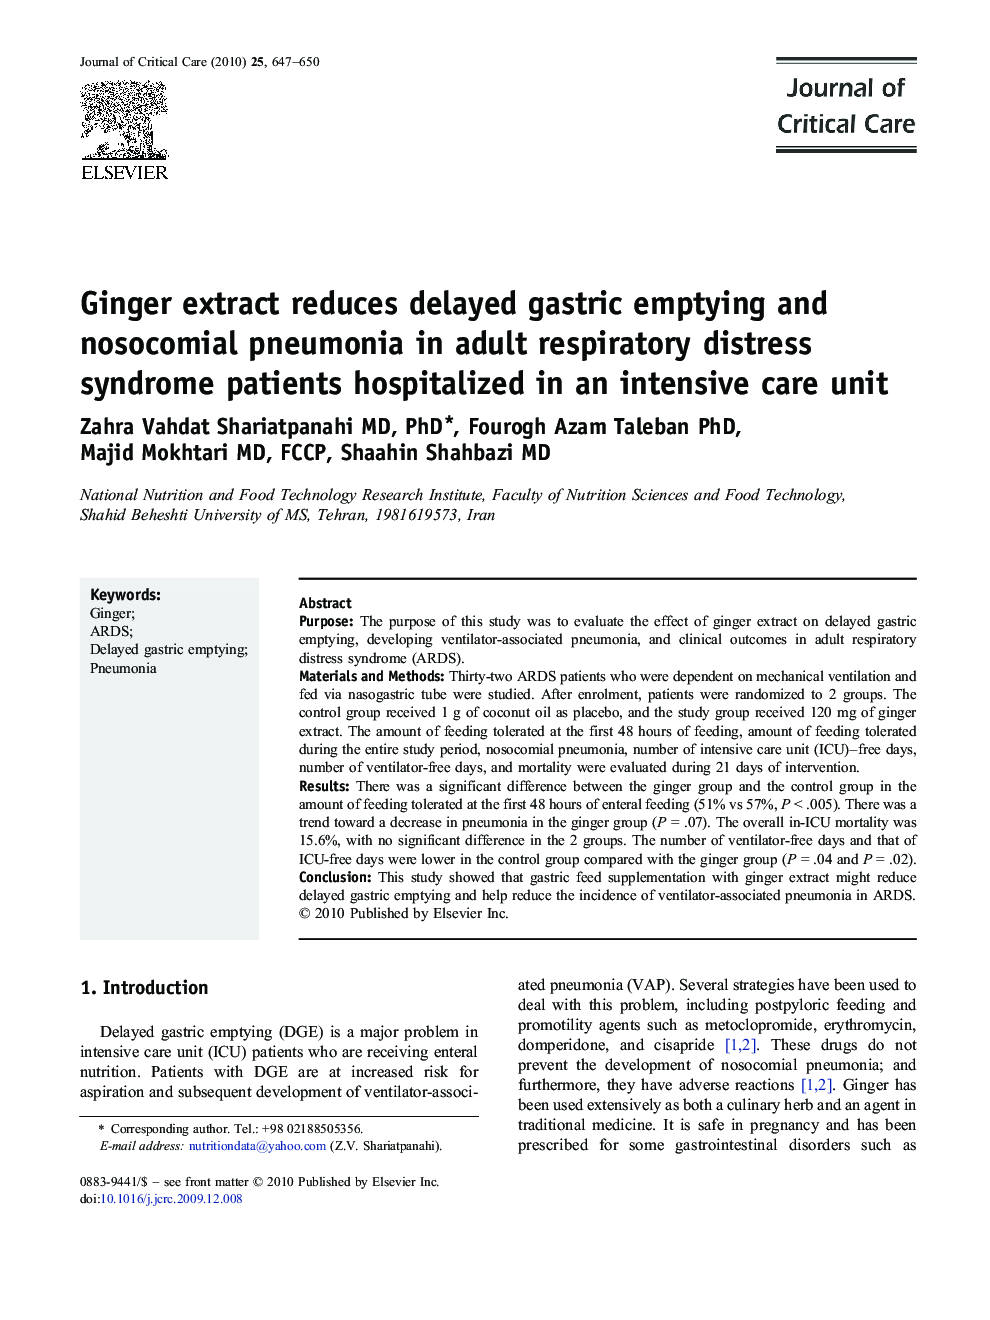 Ginger extract reduces delayed gastric emptying and nosocomial pneumonia in adult respiratory distress syndrome patients hospitalized in an intensive care unit